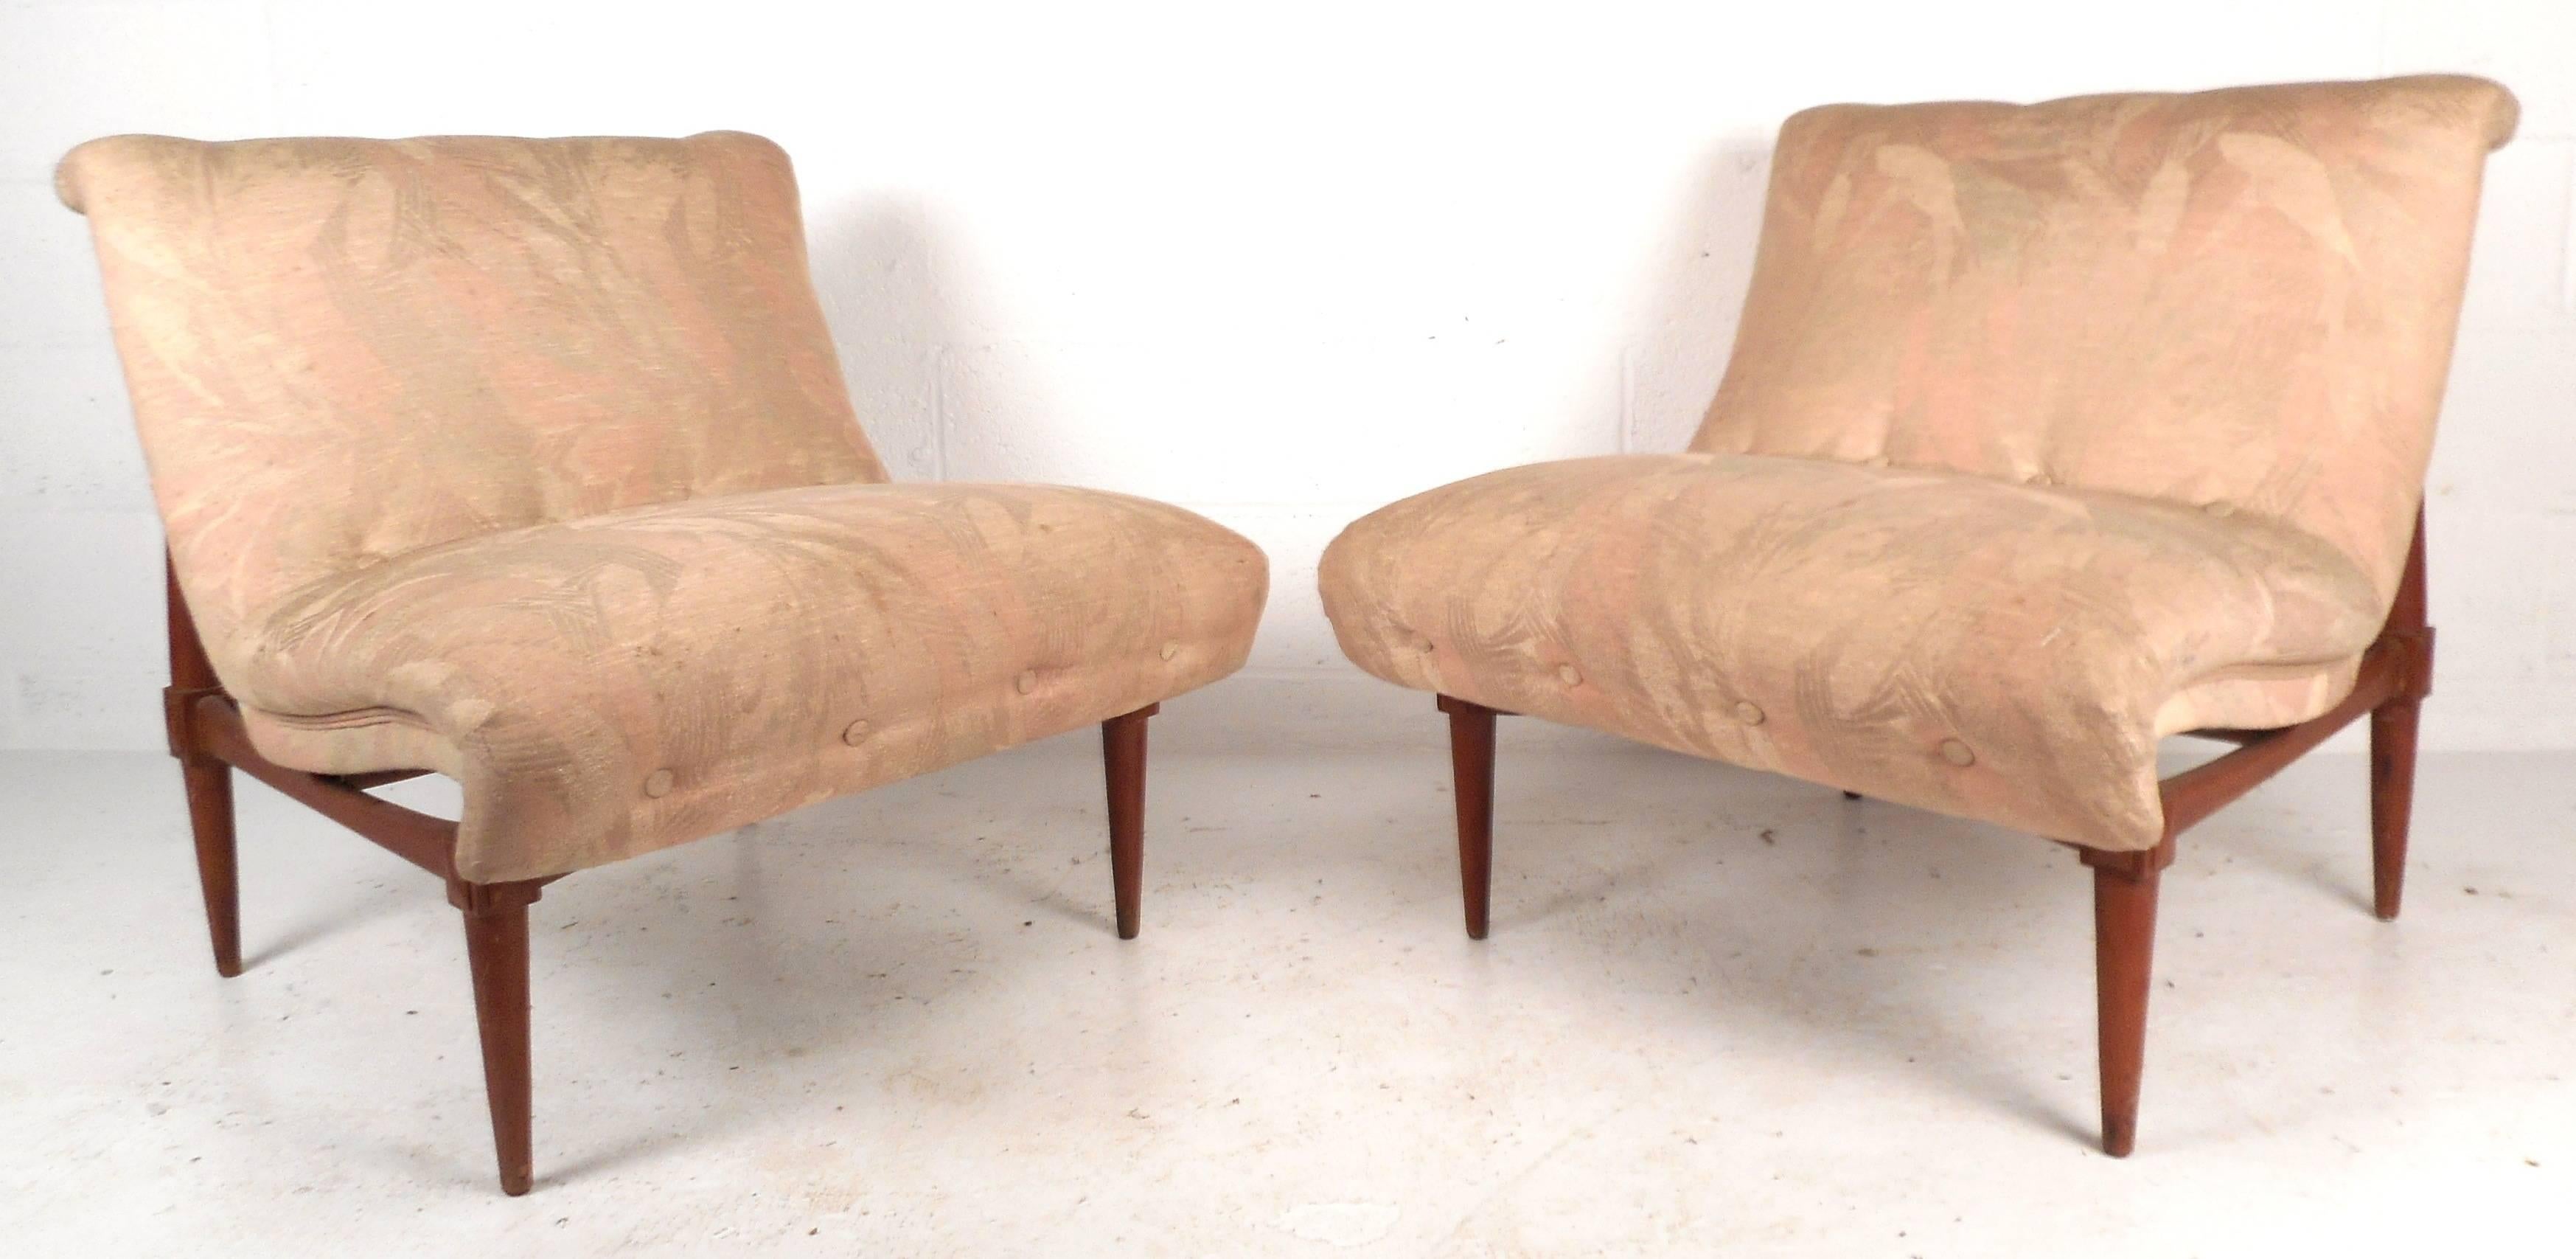 This beautiful pair of Mid-Century Modern slipper chairs features a unique sculpted walnut frame, vintage floral upholstery, and tapered legs. The impressive and comfortable wide seats and stylish armless design makes them a stylish addition to any